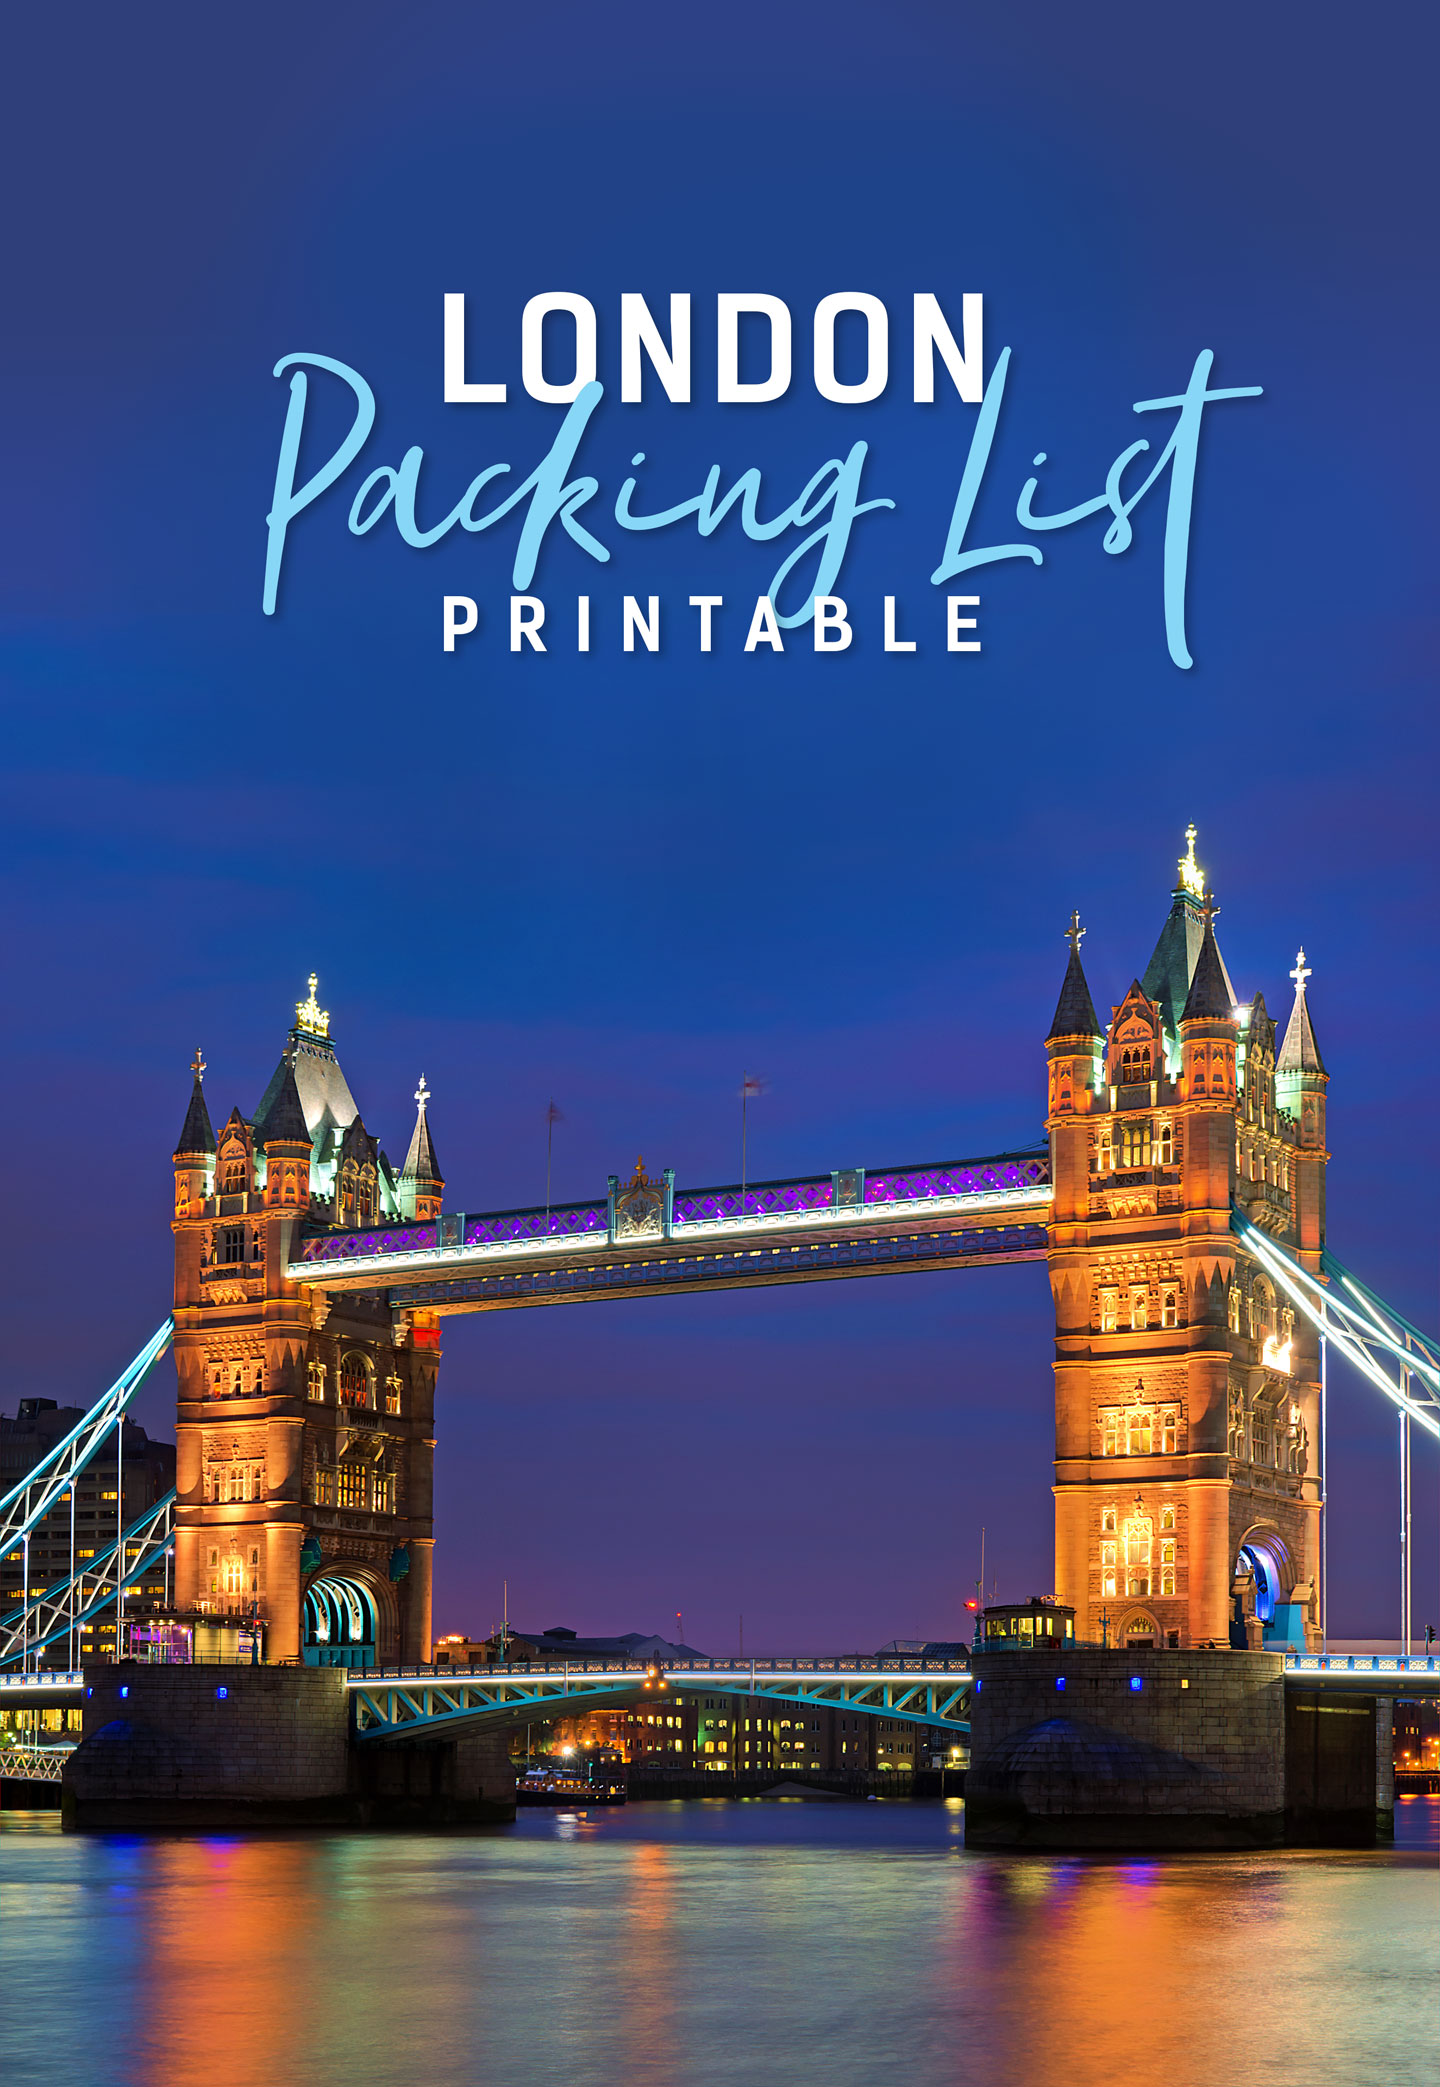 Complete London Packing List - What To Bring To London - Printable #Travel #London #England